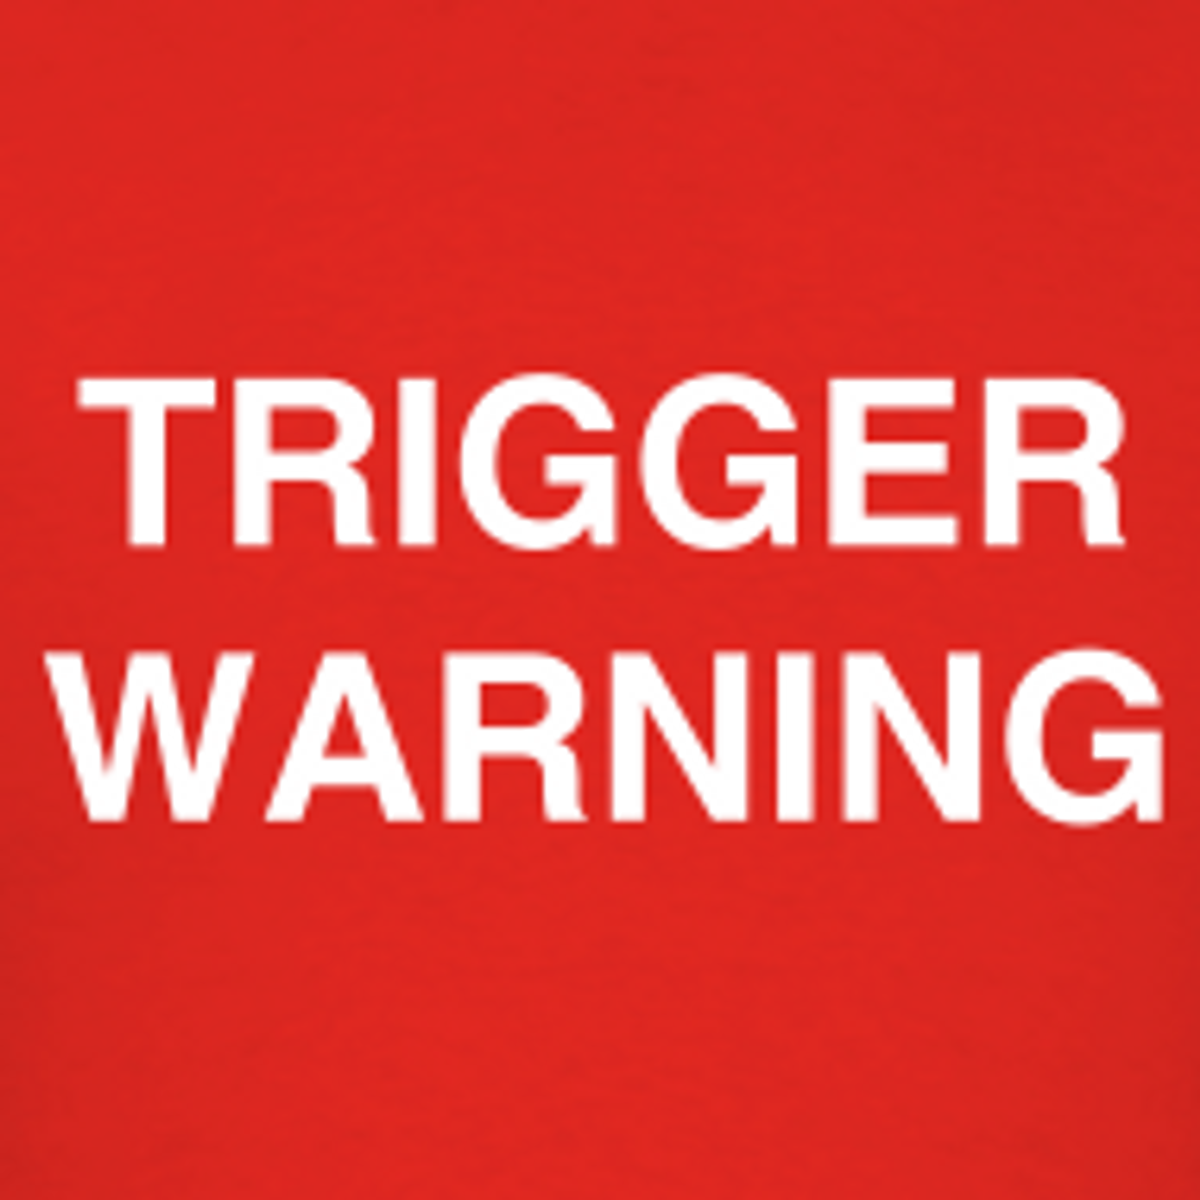 What Is A Trigger Warning and Why Is It Important?